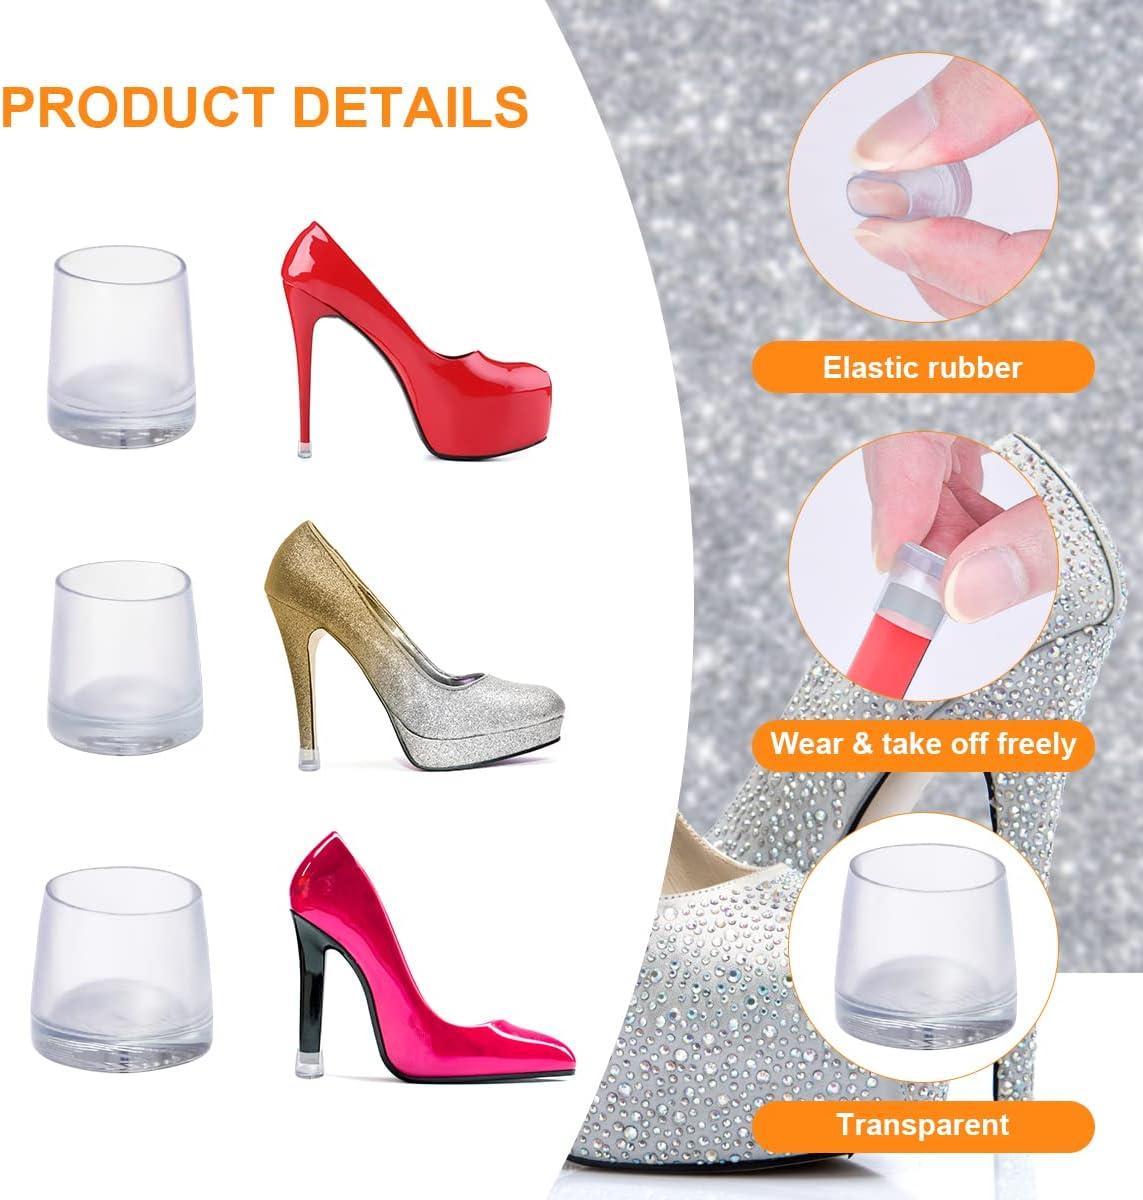 Bowiemall High Heel Protectors 3 Pairs Shoe Heel Savers Stoppers Covers for  Walking on Grass ​Uneven Floor High Heel Grass Protector for Women -  Transparent (Size S M L) : Amazon.in: Shoes & Handbags